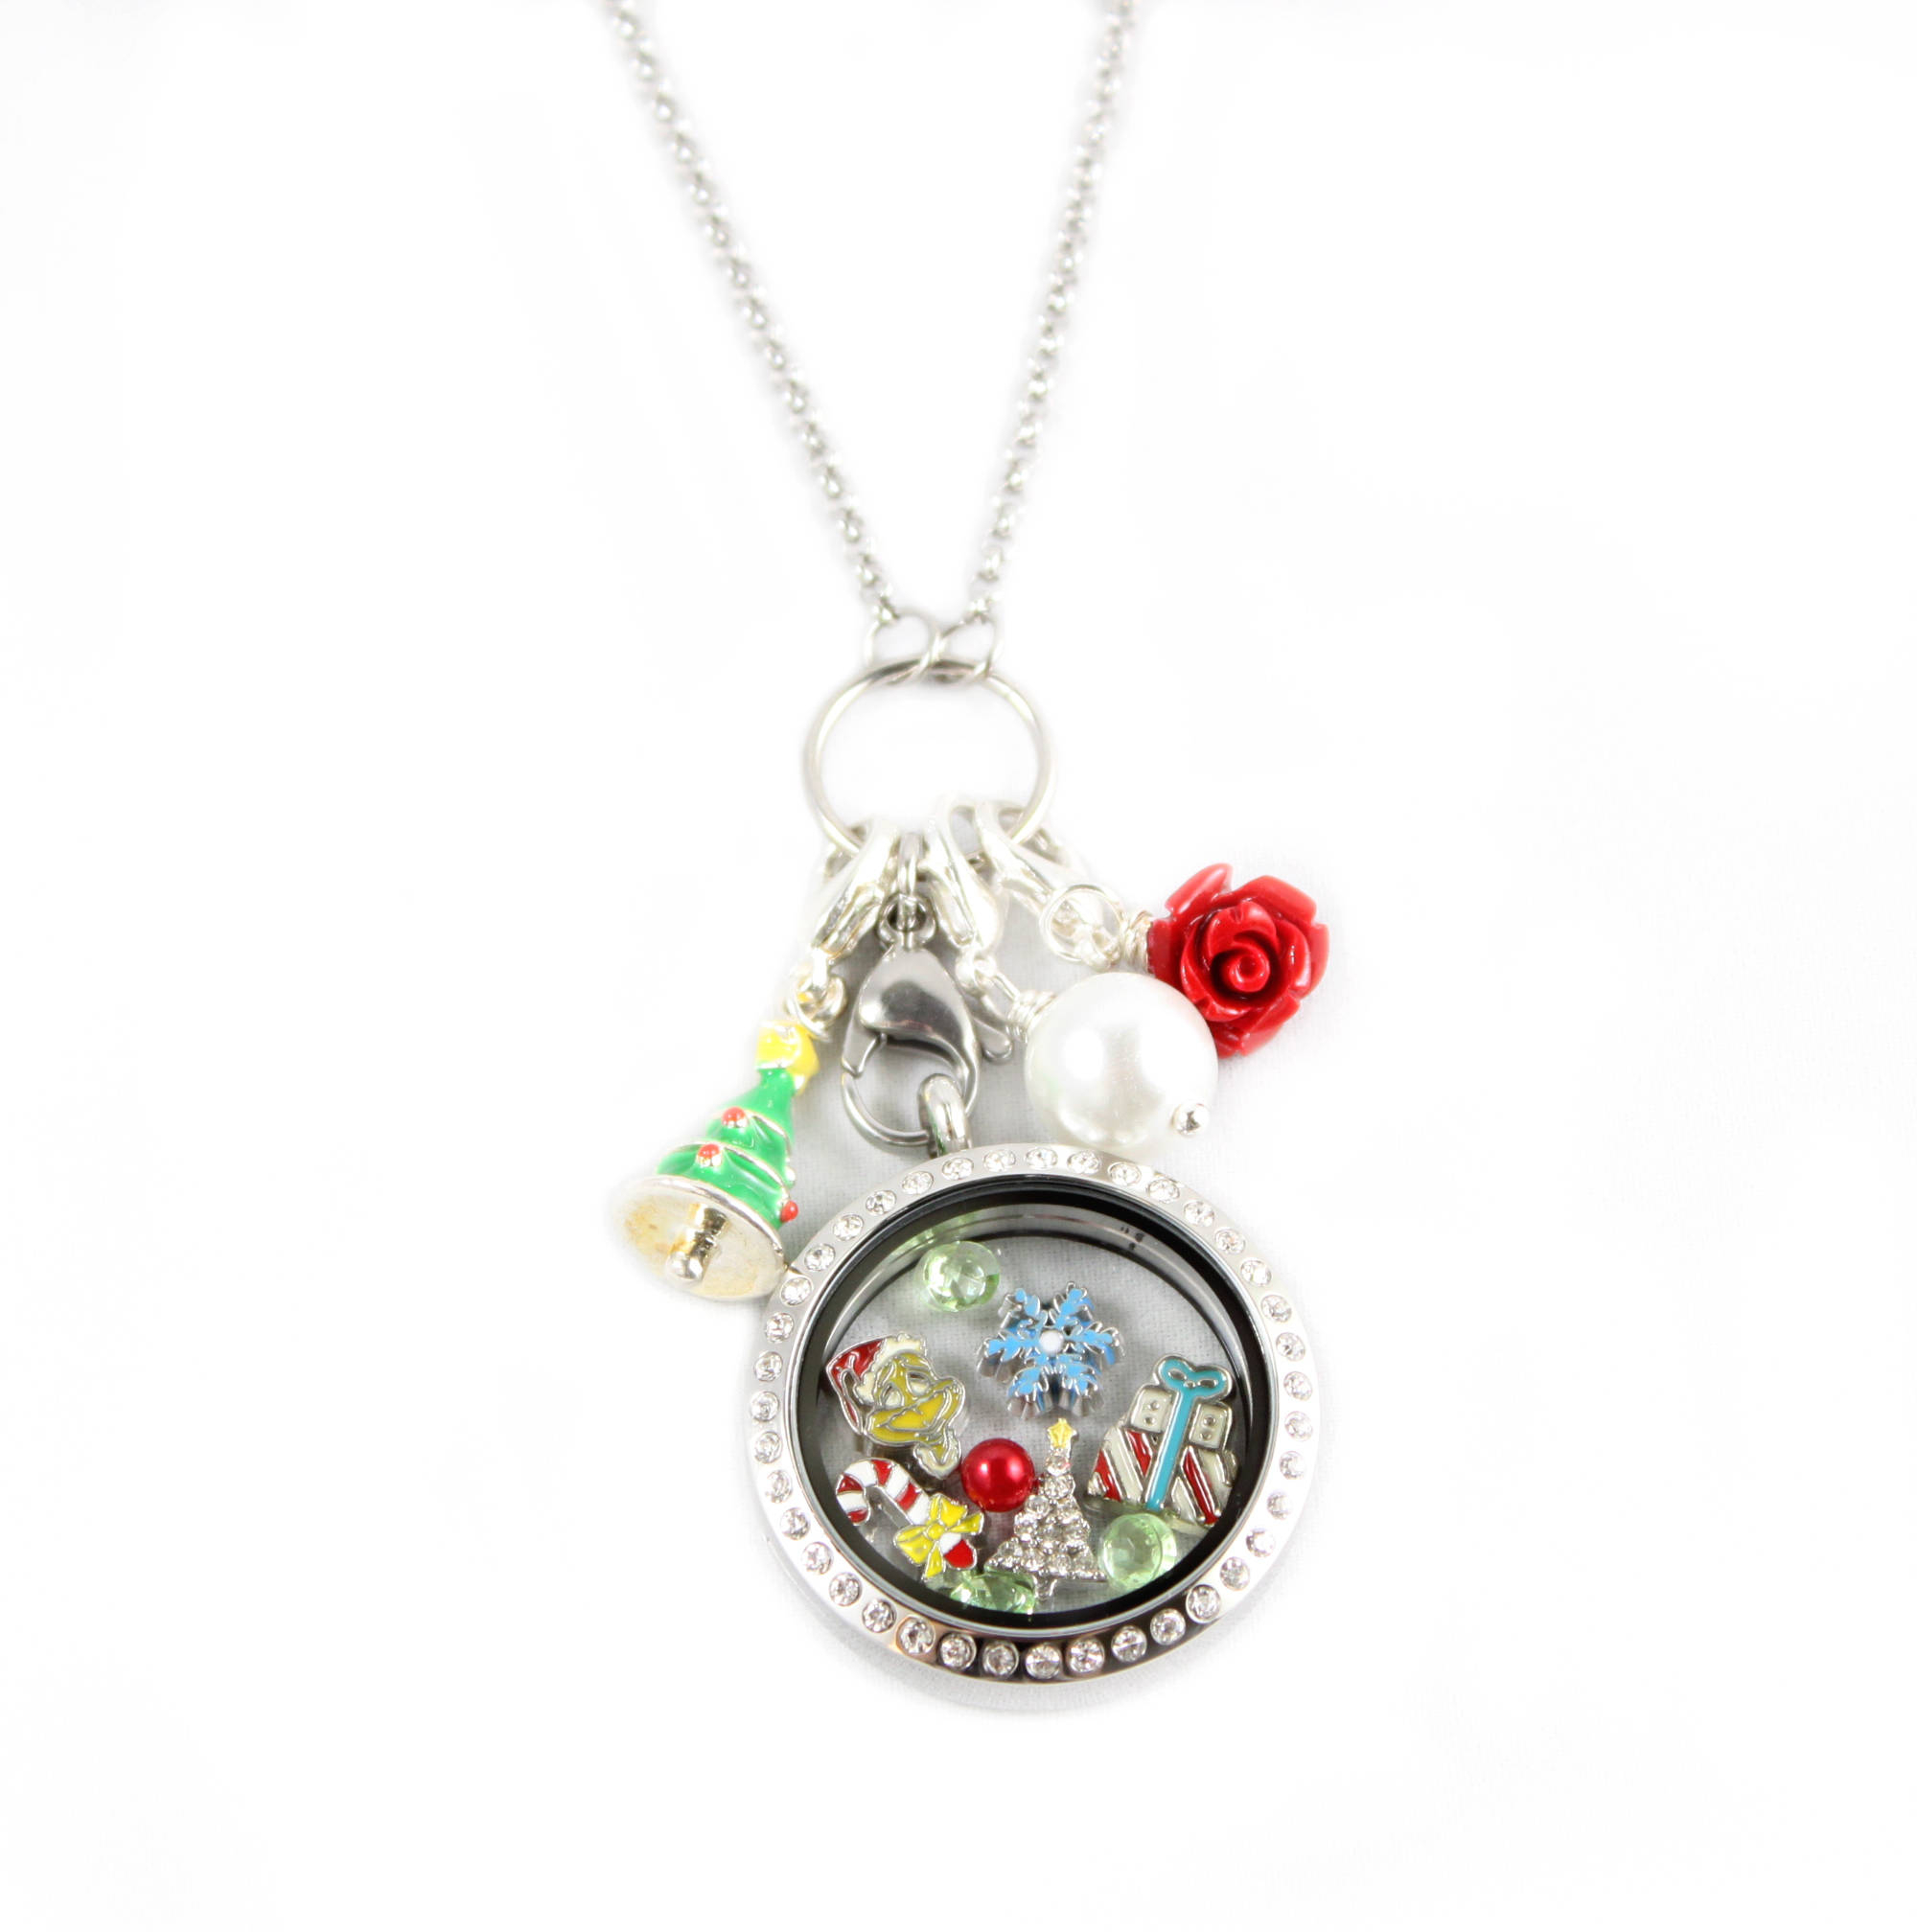 Origami Owl Christmas Charms Mr Grinch Christmas Holiday Floating Locket And Charm Collection